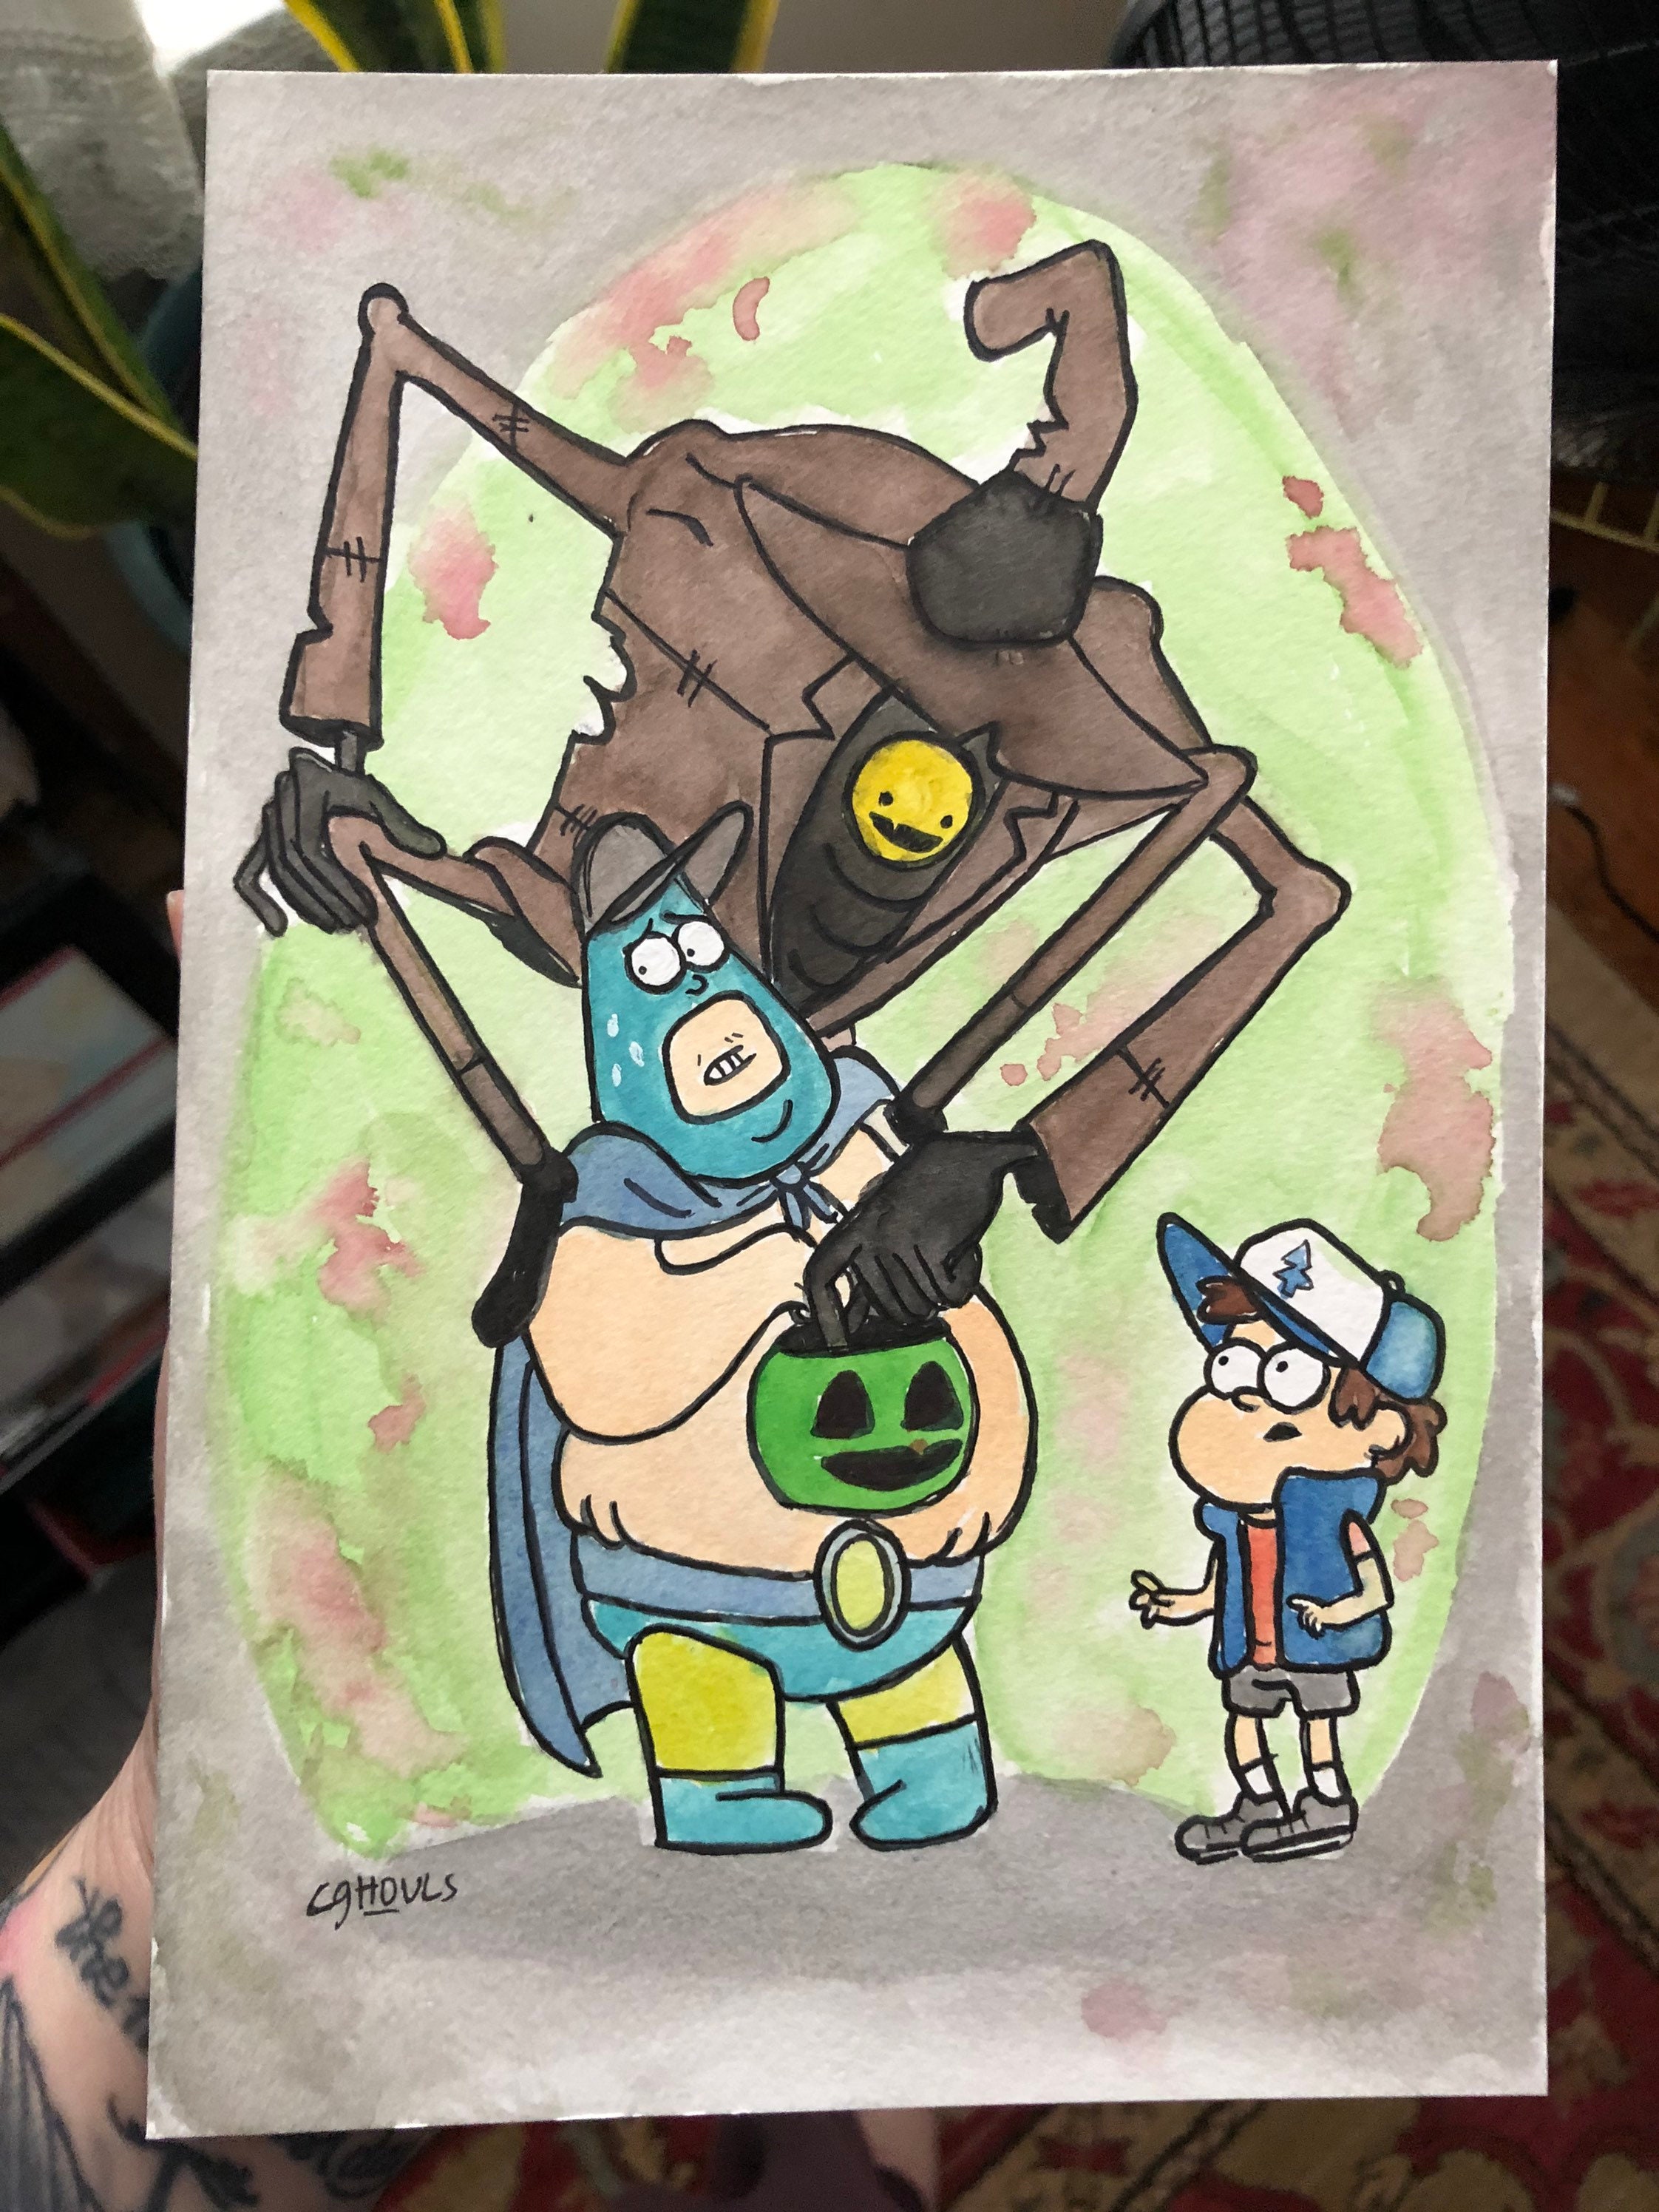 Summerween 6 X 9 Ink And Watercolor Fan Art Gravity Falls | Etsy